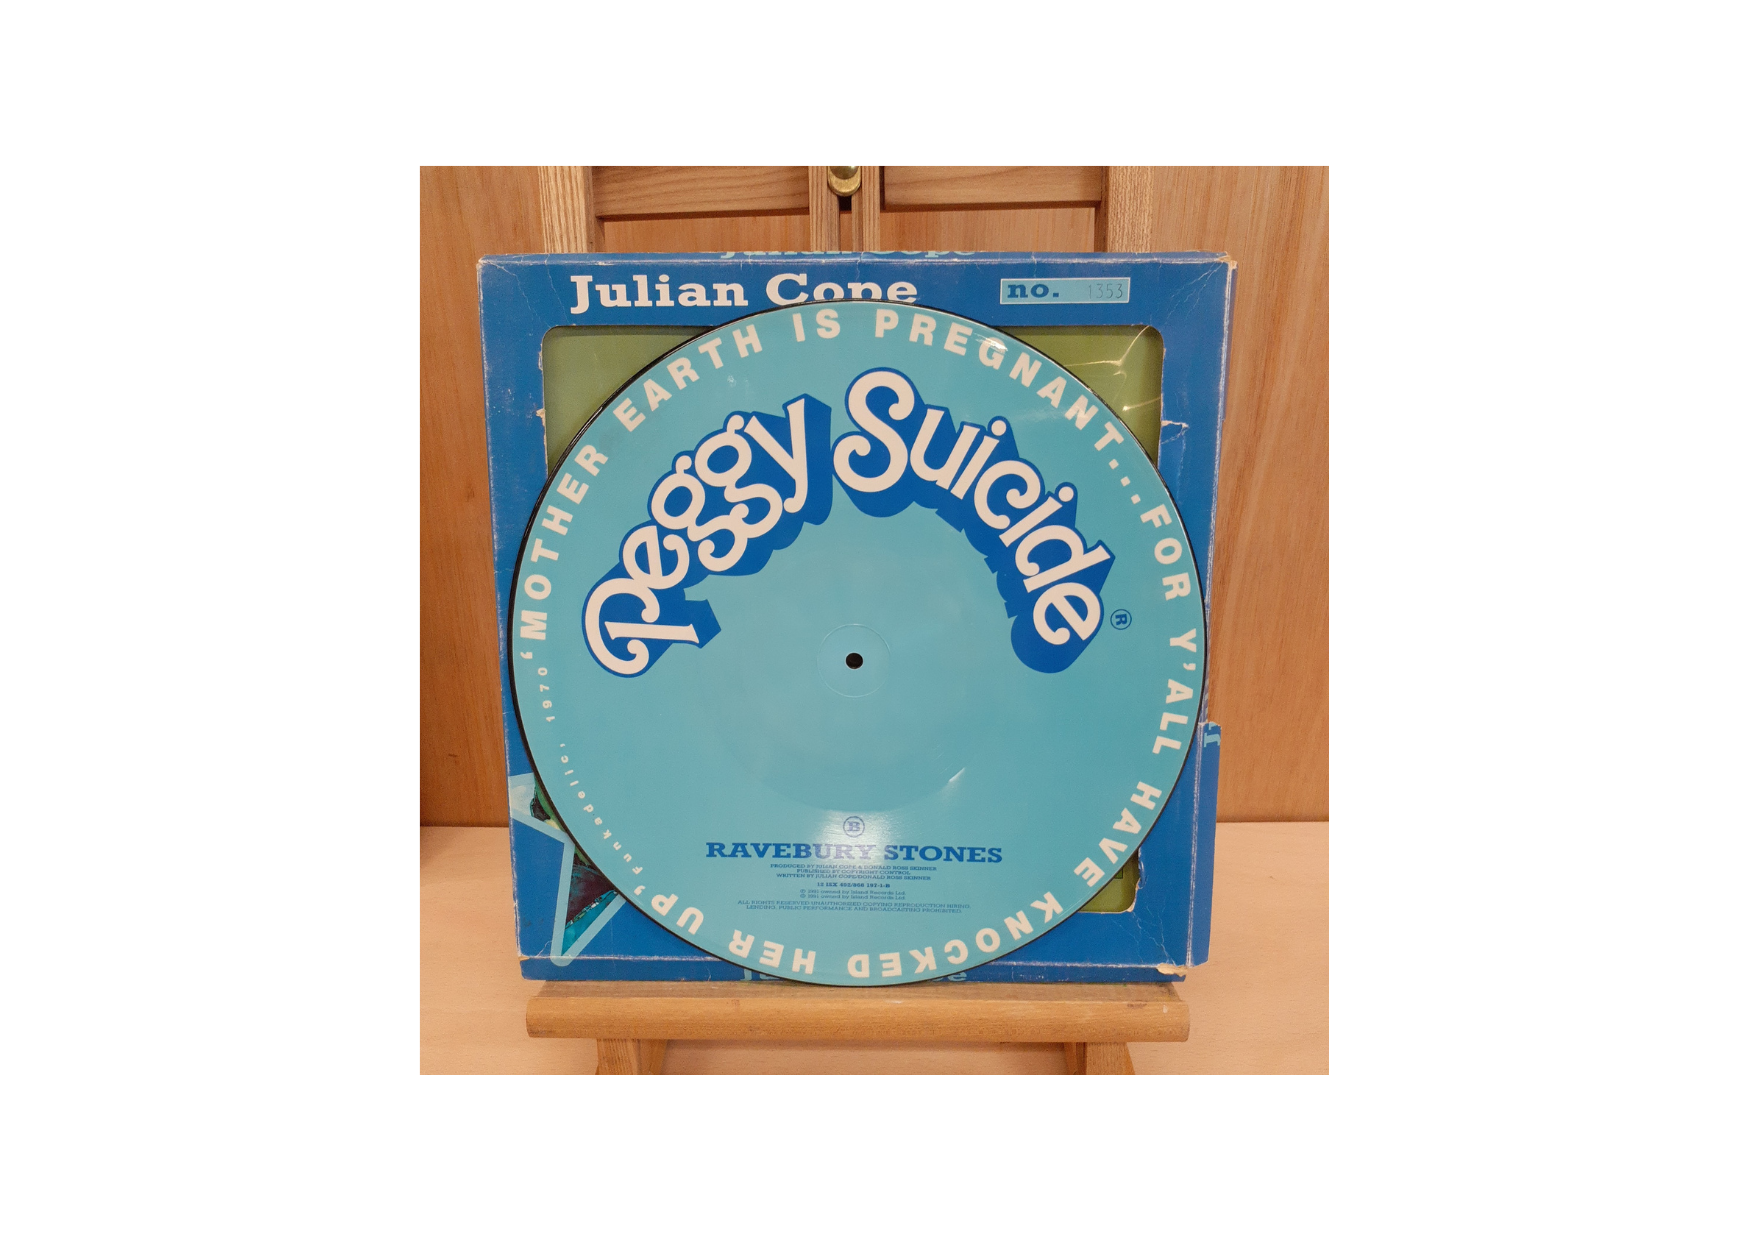 Julian Cope - Easty Risin' (East Easy Rider) 12" Boxed Record Side Two View